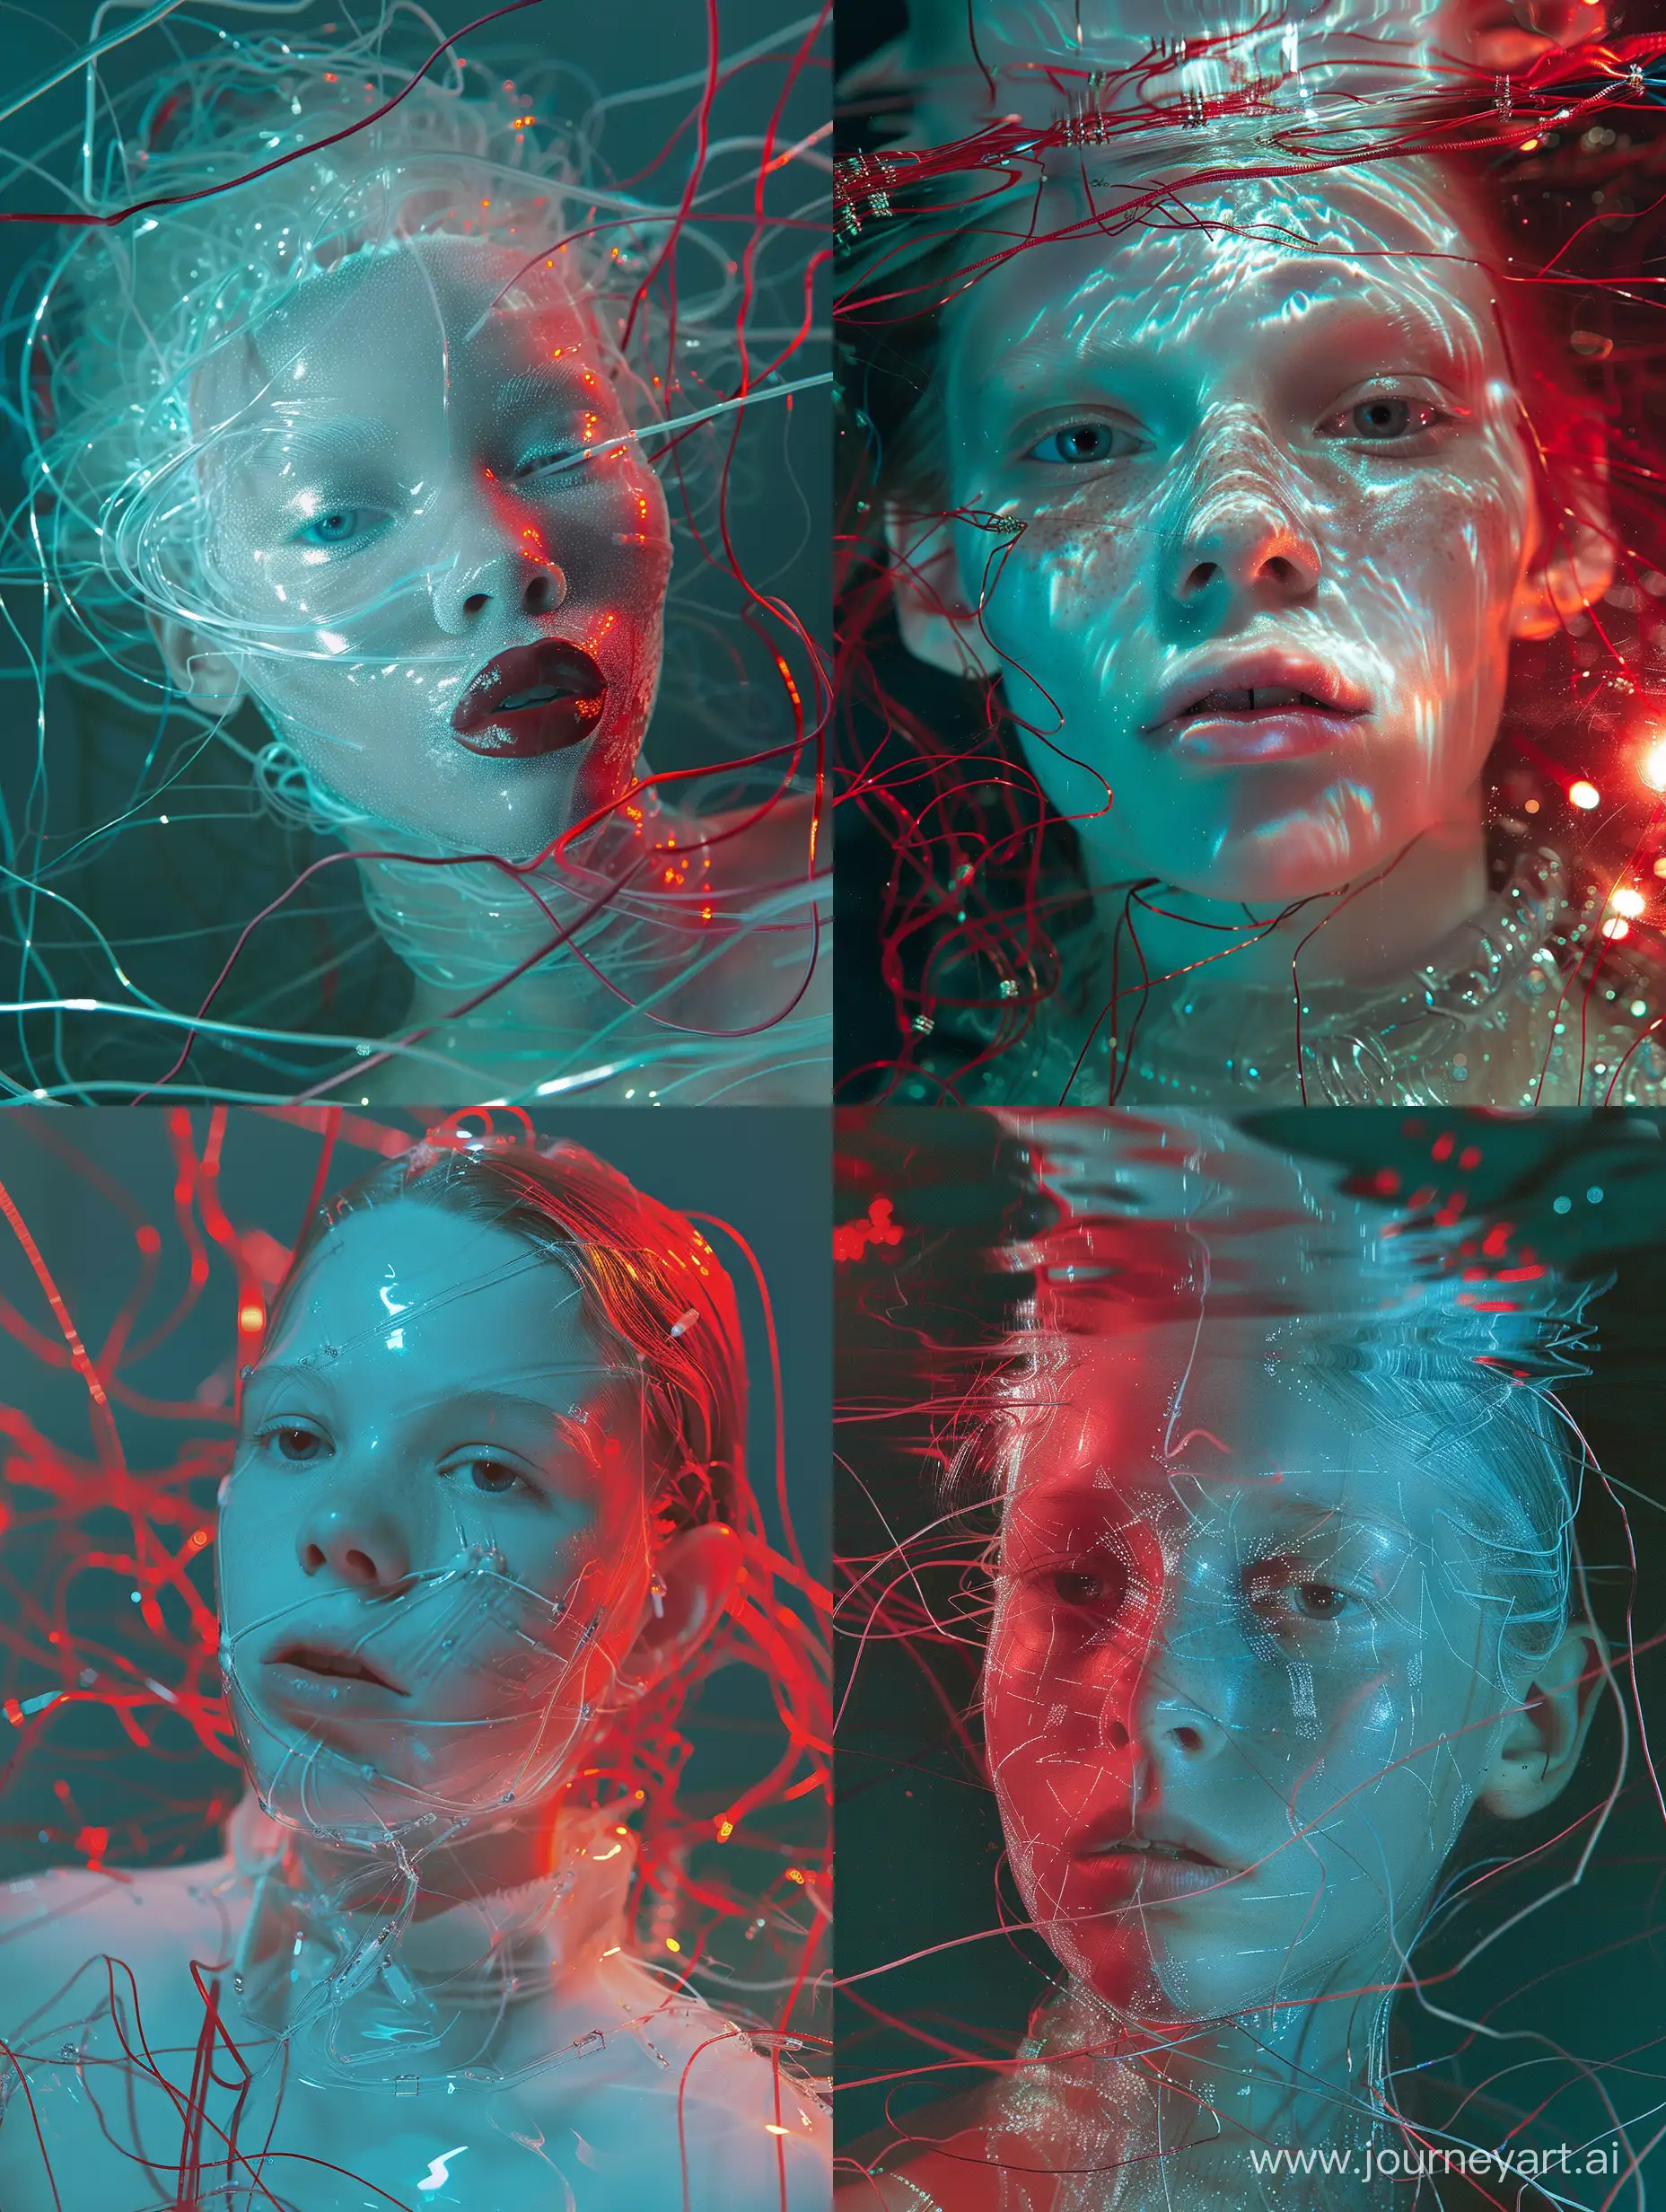 Tim Walker's haute-couture frontal portrait of clear white ethereal young woman with translucent skin drowning in sea of wires. Red and cyan hues, glowing highlights, dark shadows --v 6.0